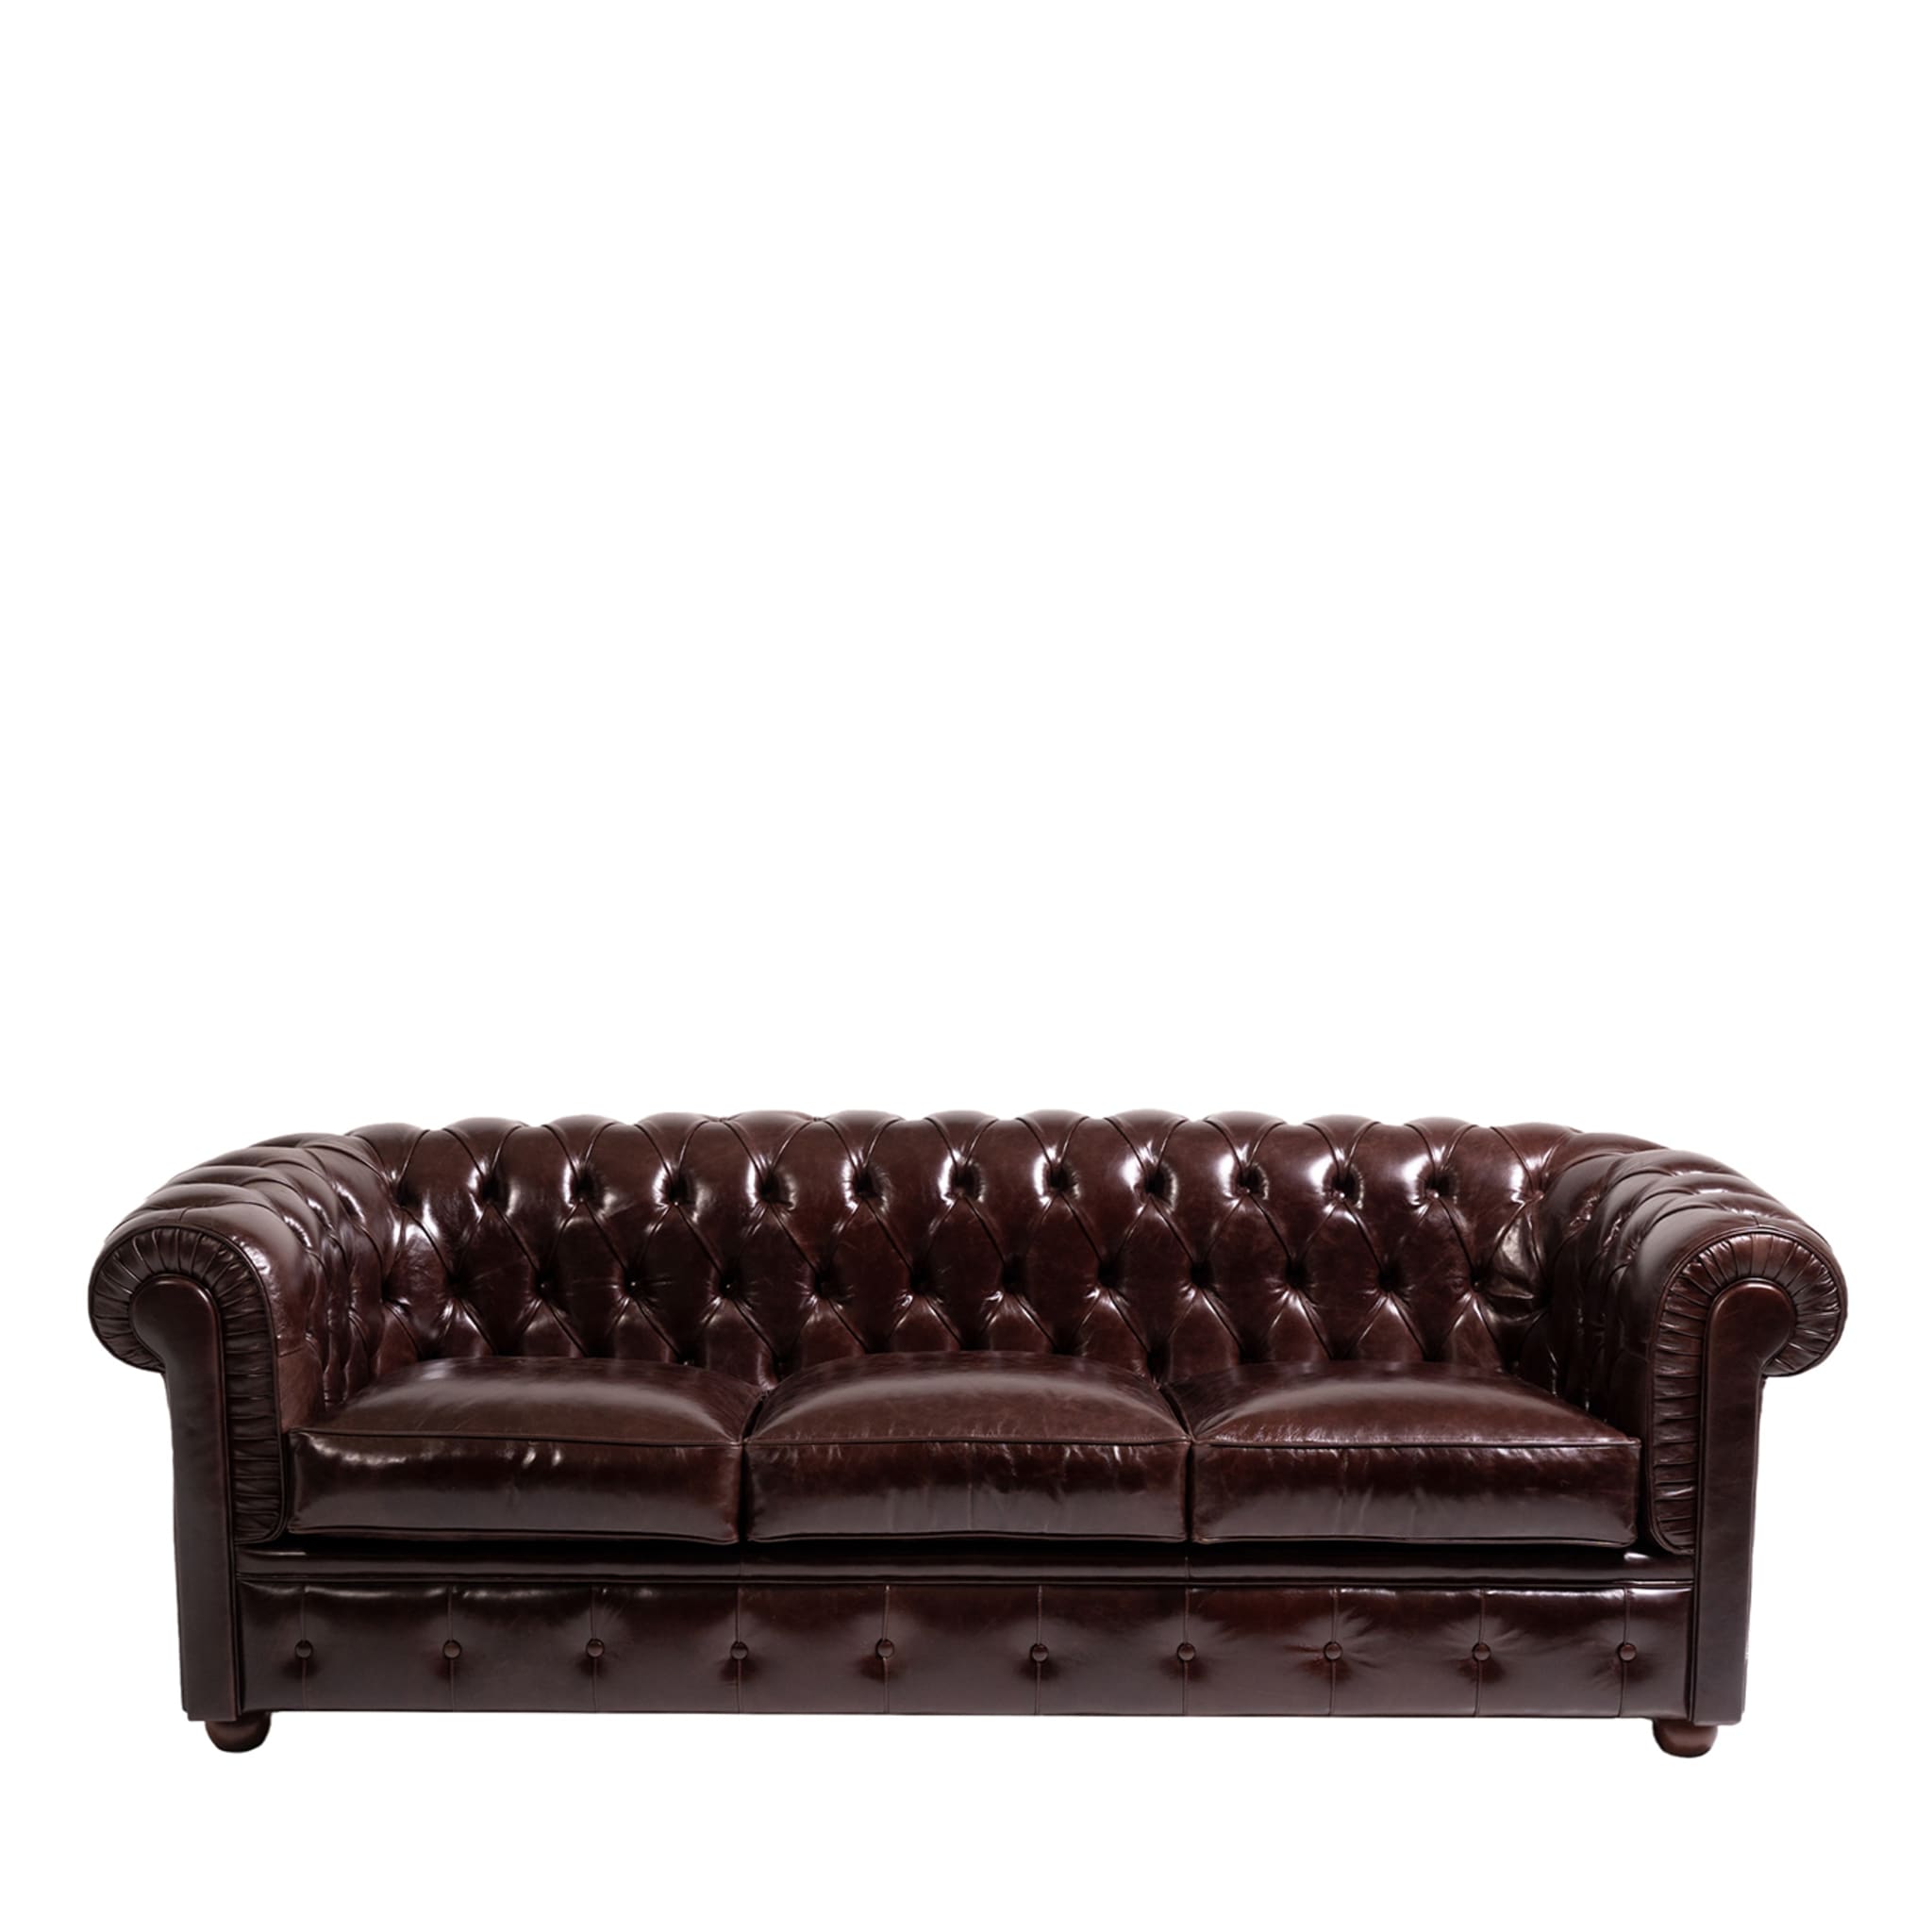 Chesterfield Brown Leather 3-Seater Sofa - Main view